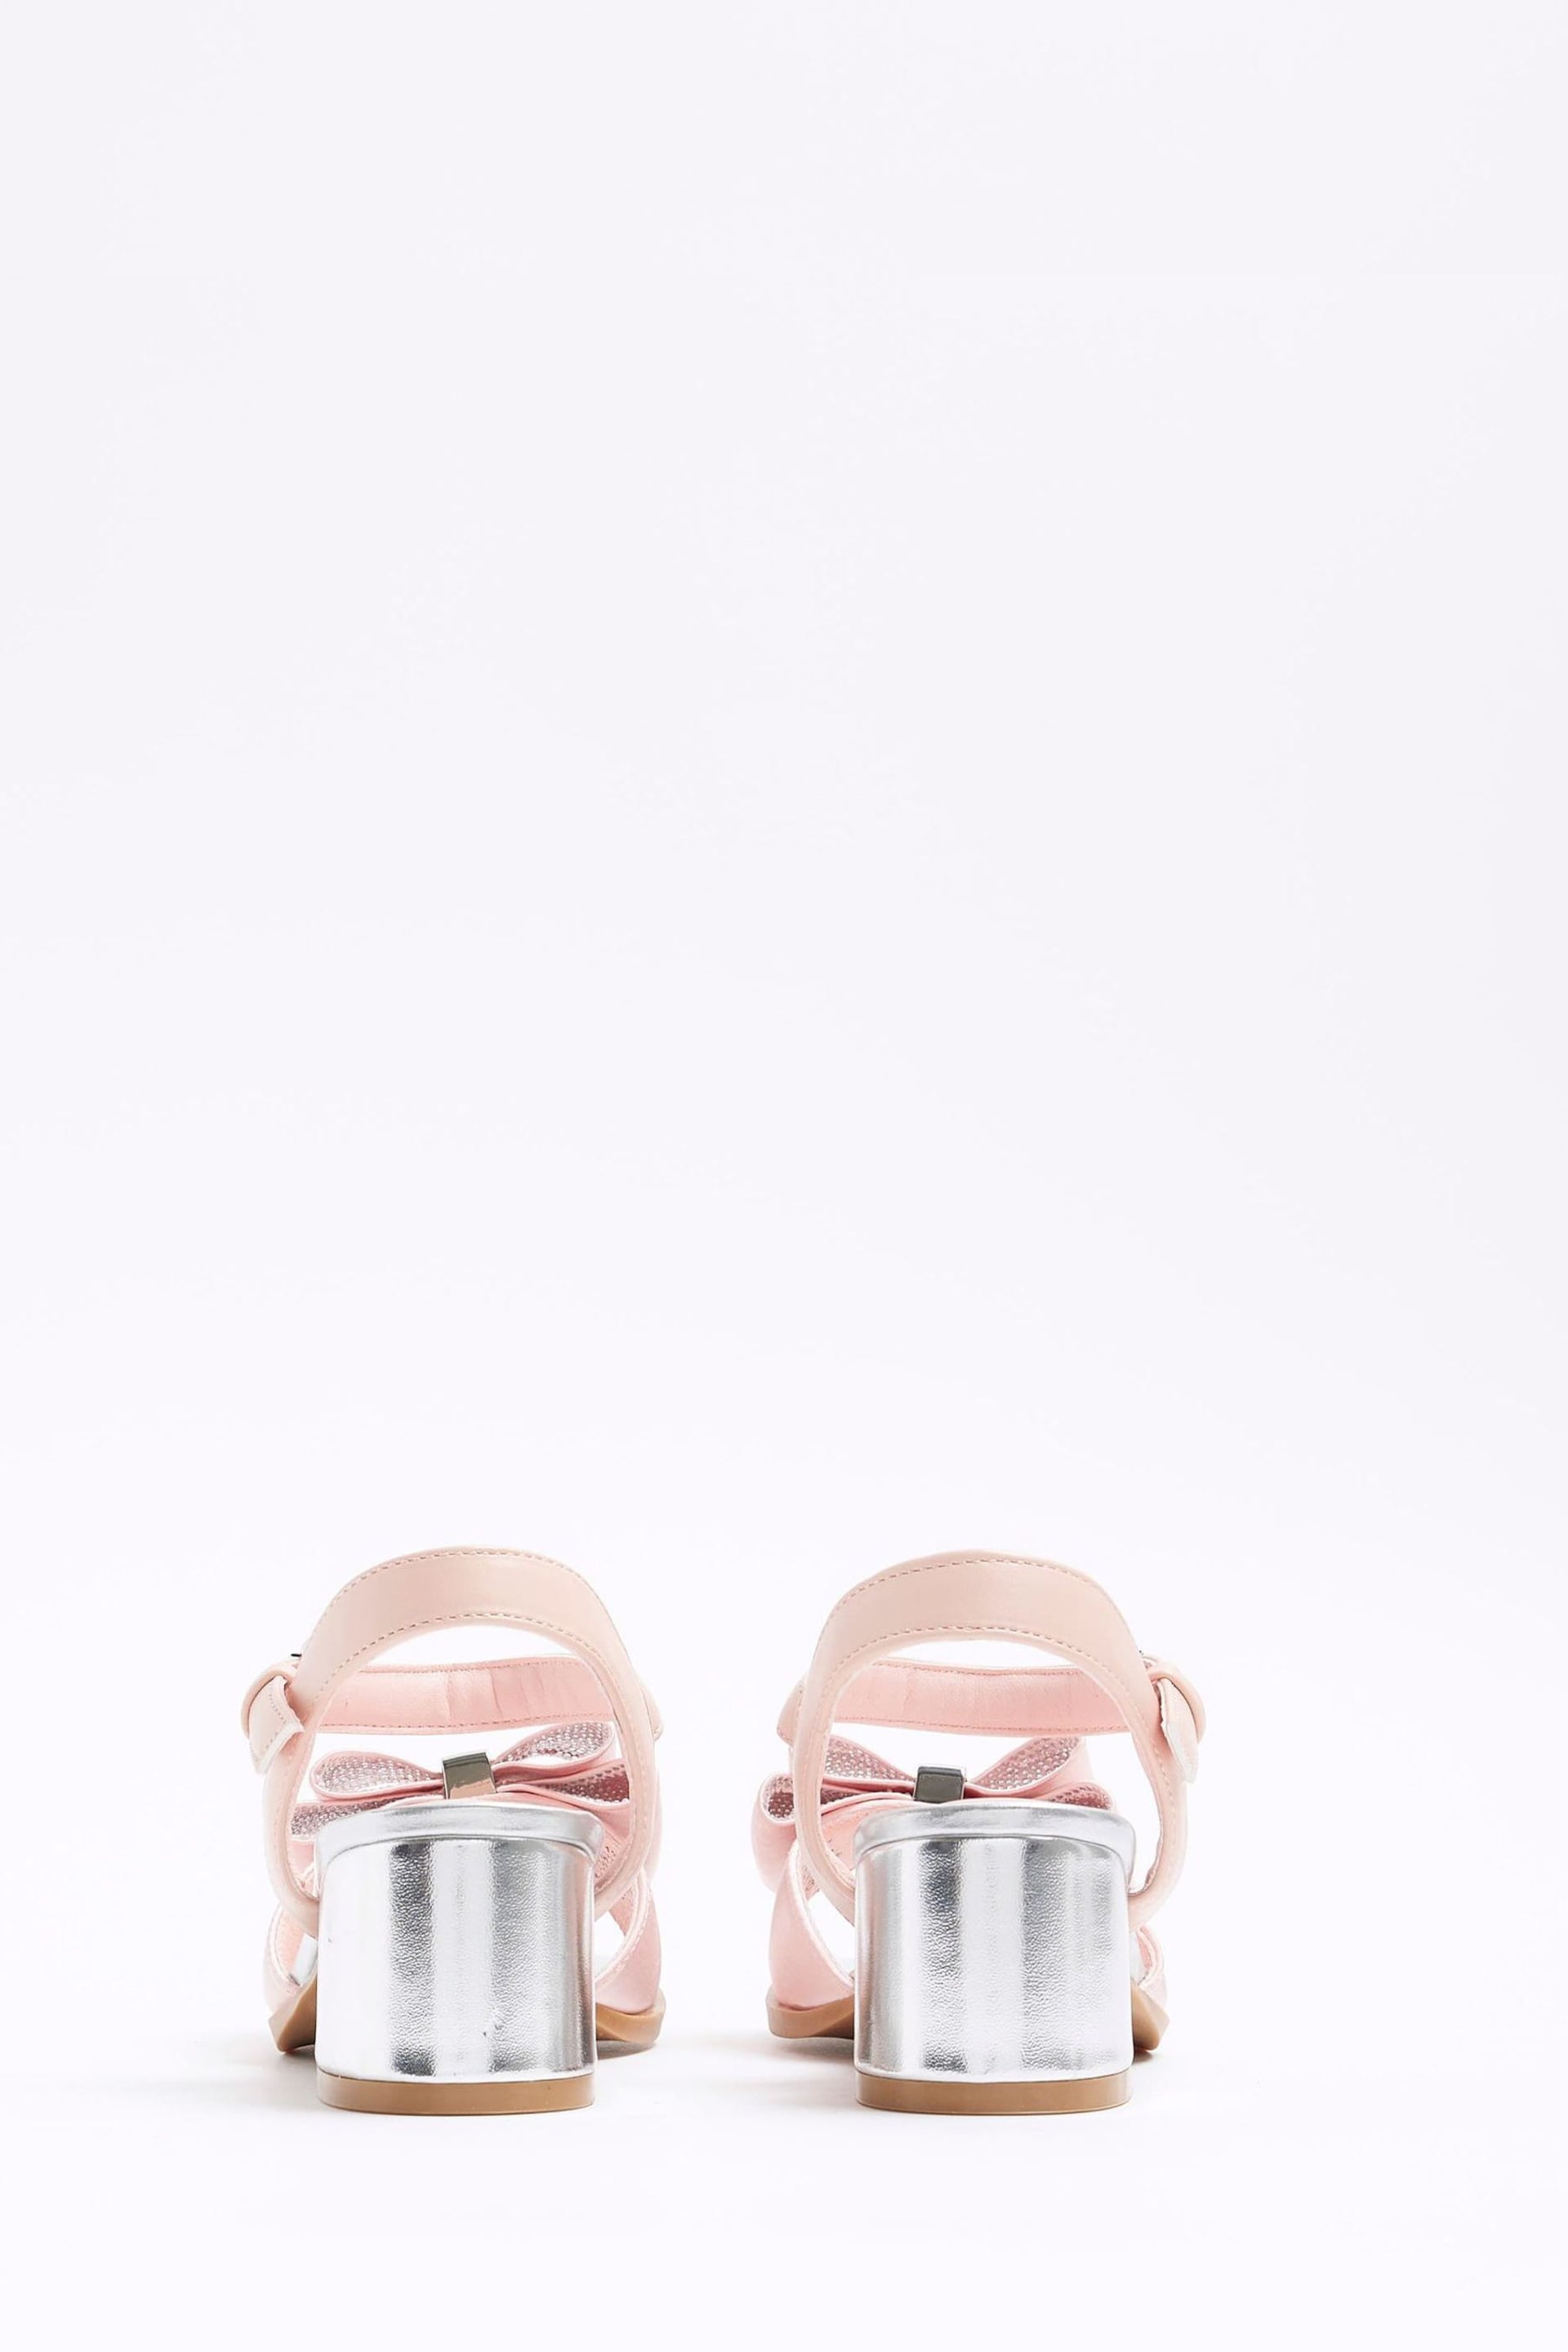 River Island Pink Girls Satin Bow Heeled Sandals - Image 2 of 5